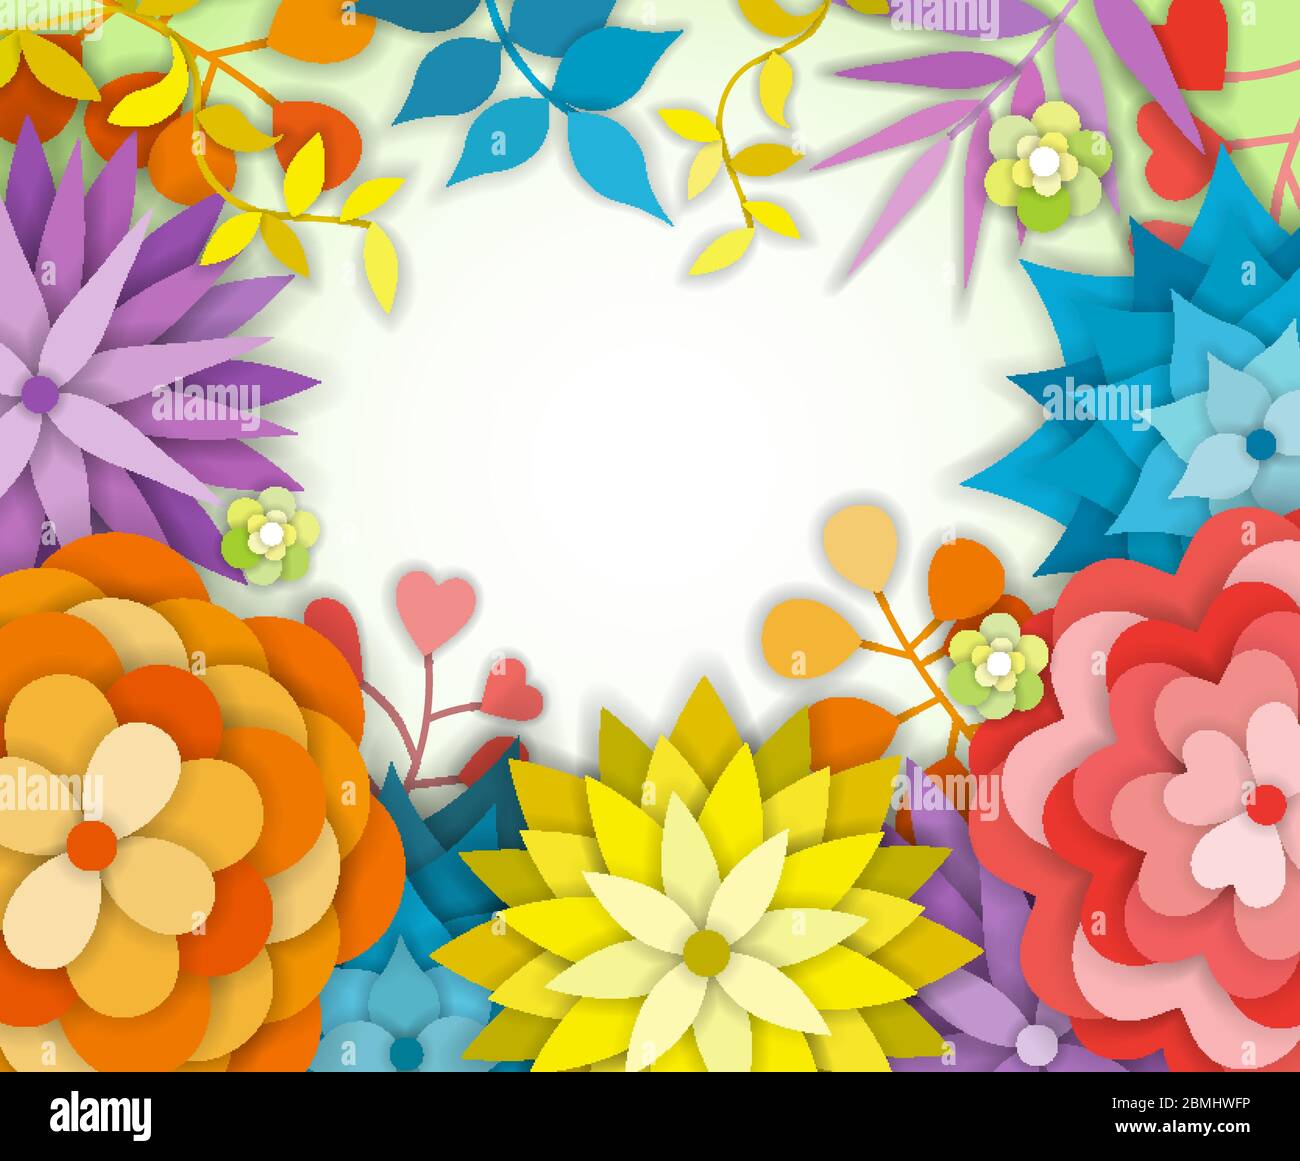 Floral Graphic Design - with Colorful Flowers - for t-shirt, fashion, prints Stock Vector